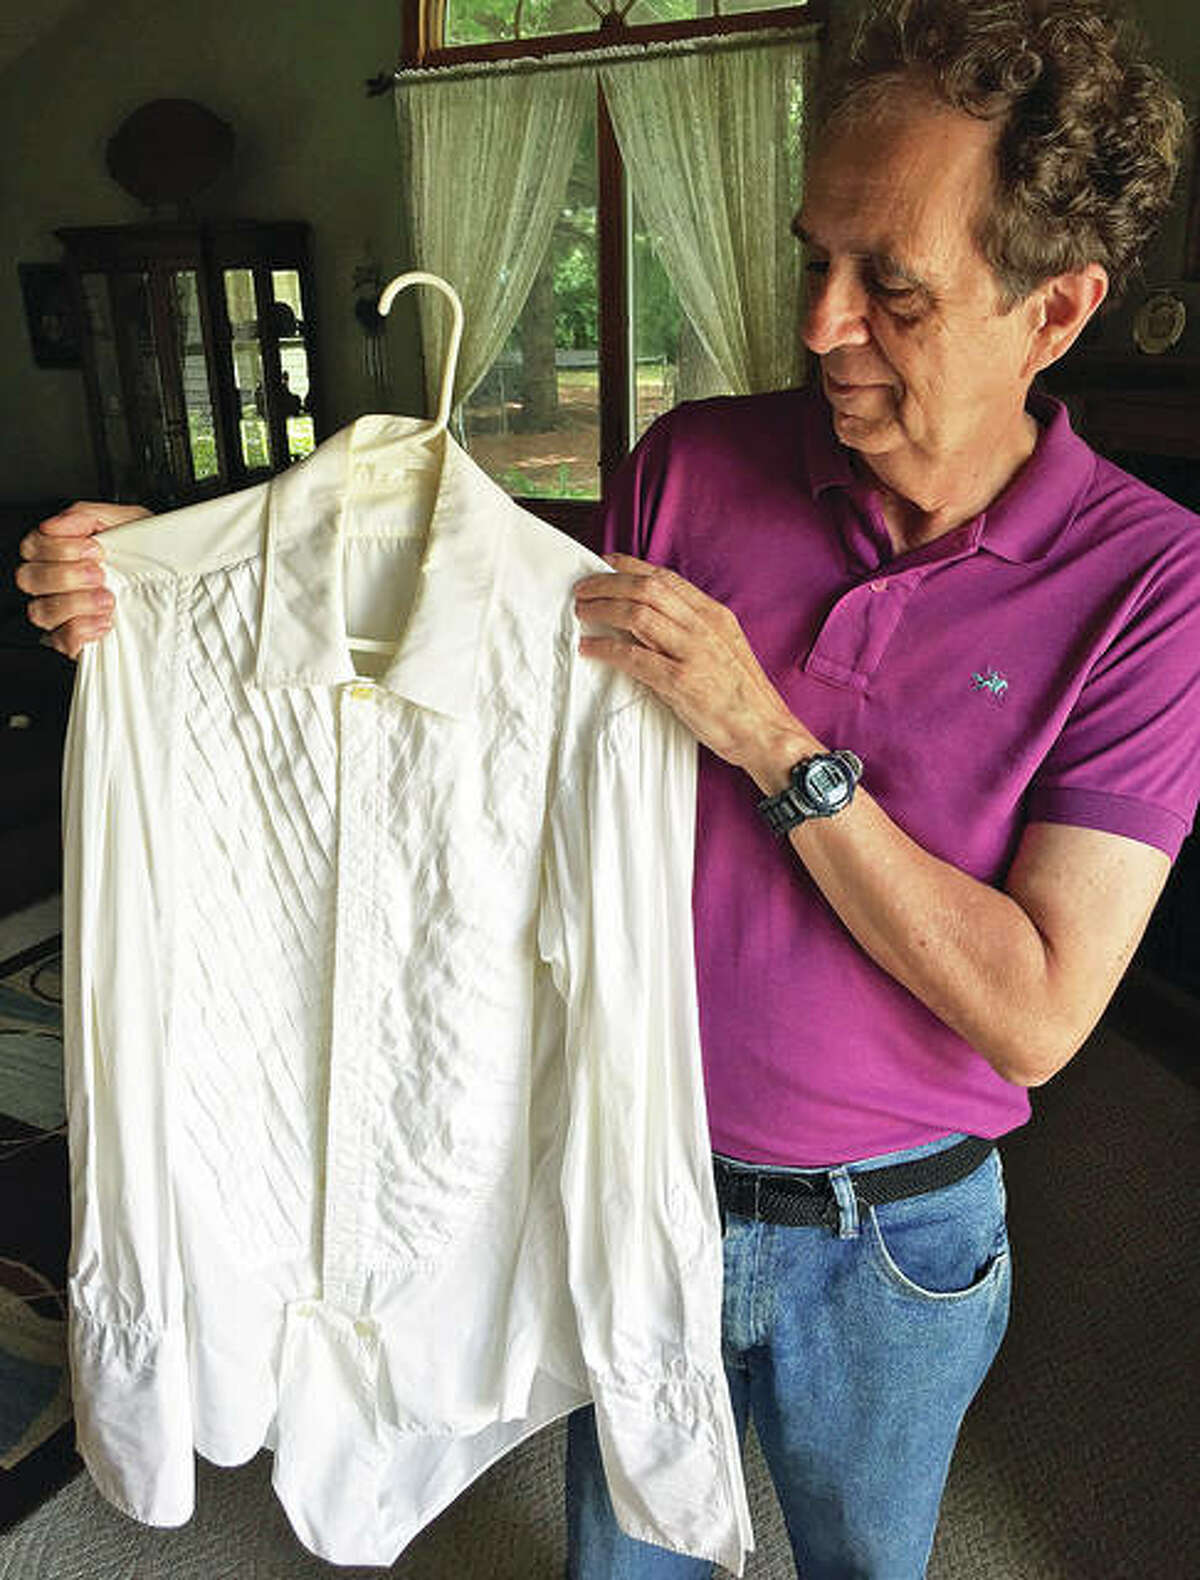 Jim Wiemers holds a tuxedo shirt that he purchased at a used clothing store in California, believed to have once belonged to Frank Sinatra.